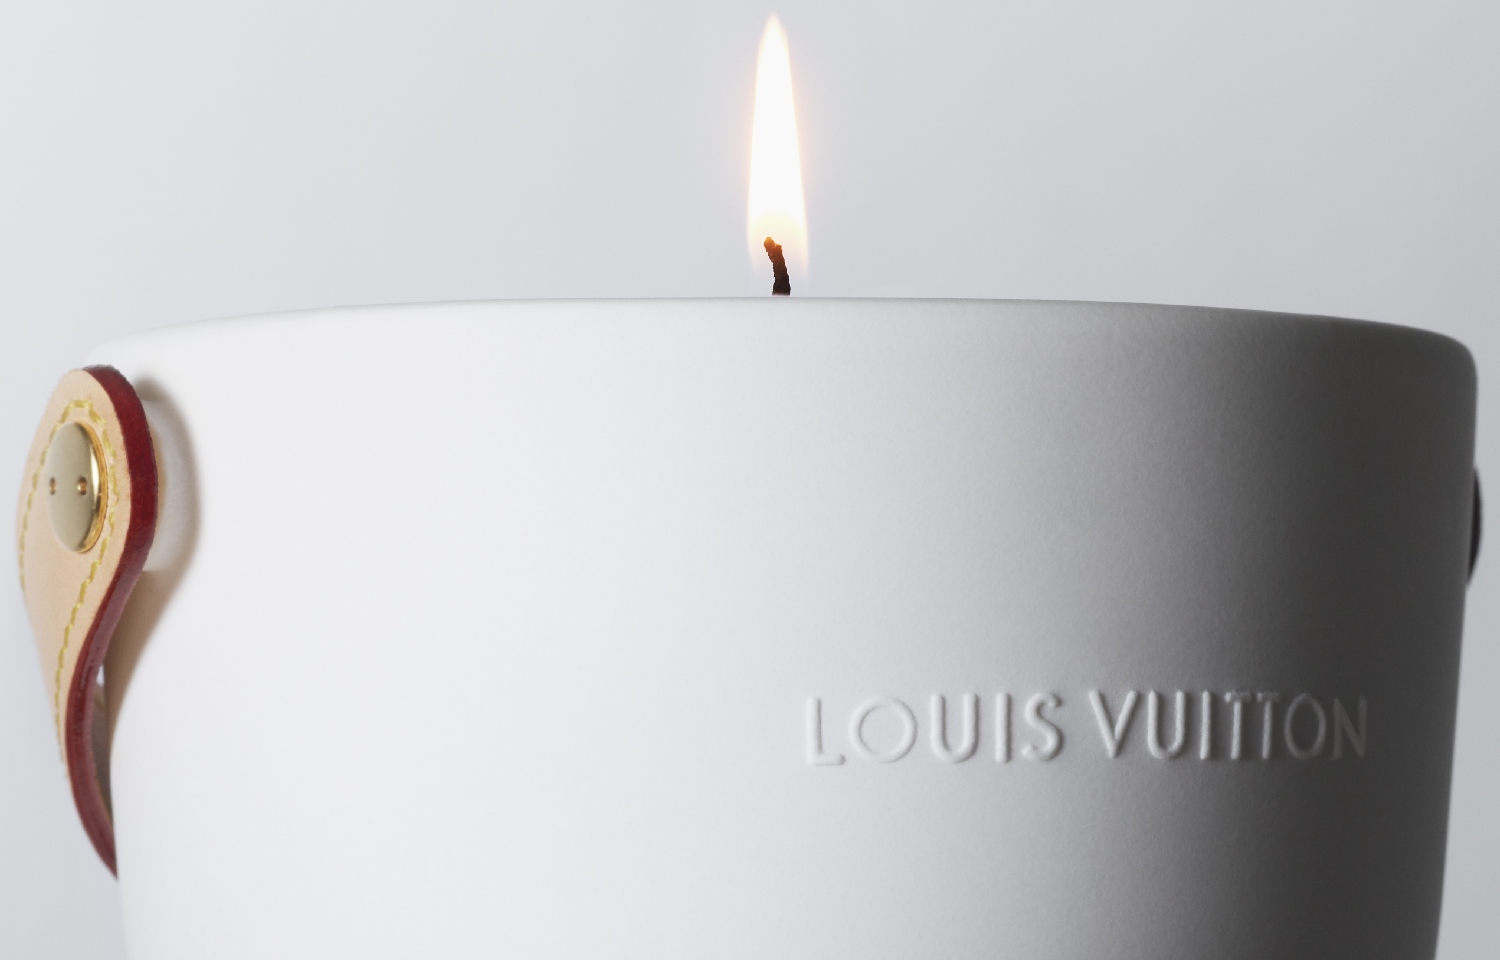 Louis Vuitton scented candles collection - All About Mykonos